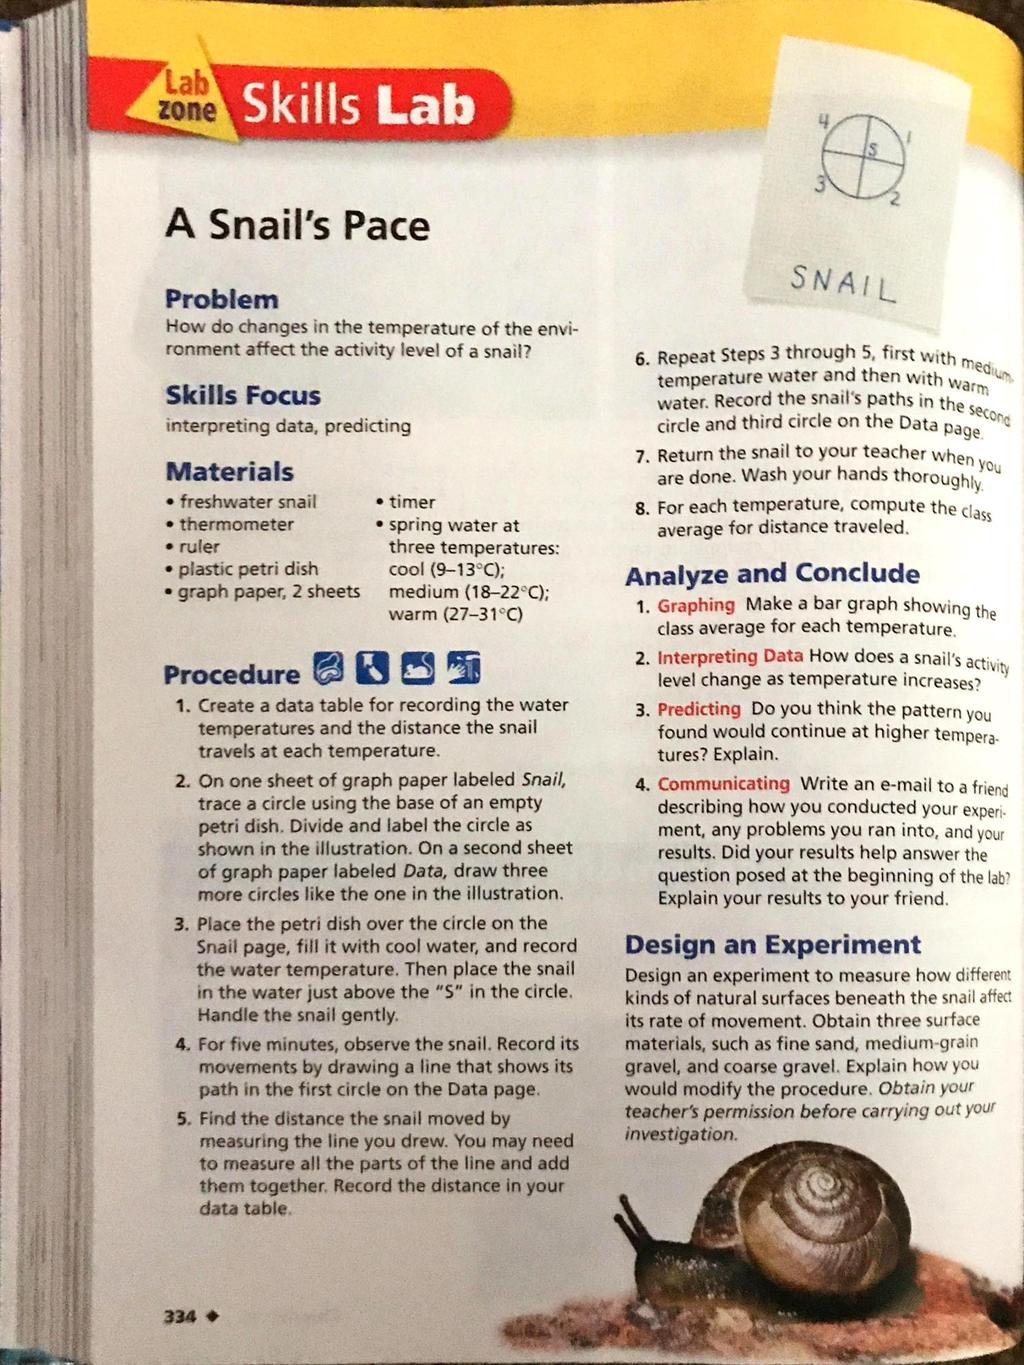 Lab zoneskills Lab A Snail's Pace Problem How do changes in the temperature of the environment affect the activity level of a snail?